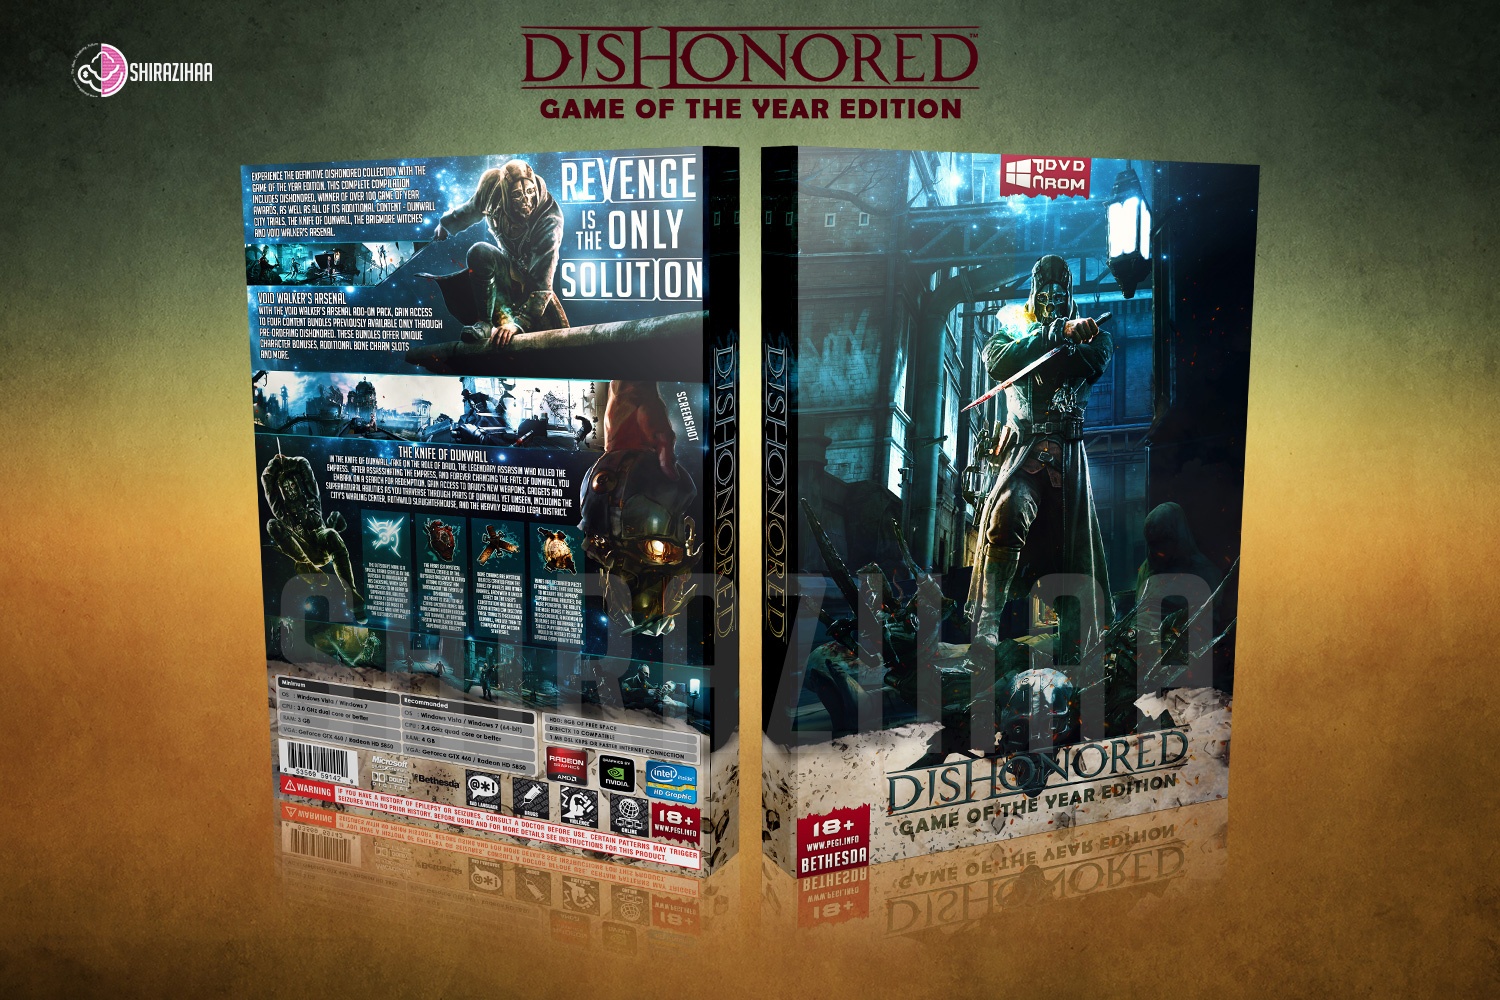 Dishonored: Game Of The Year Edition box cover